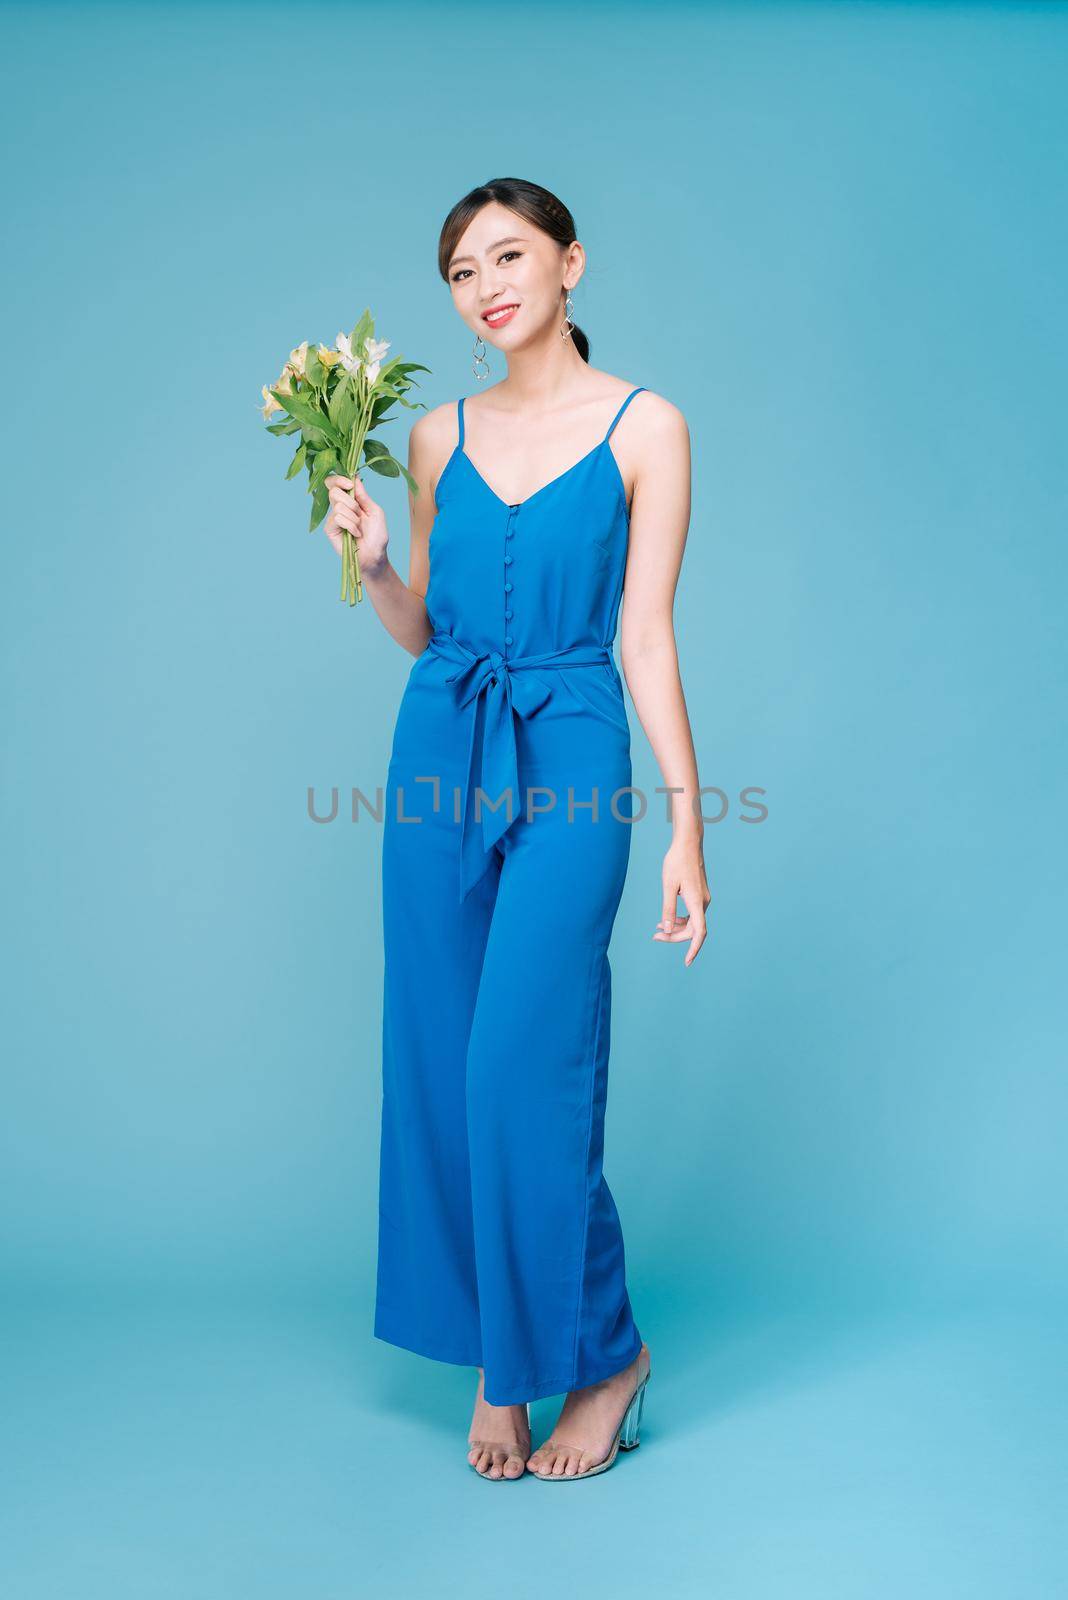 Beautiful girl in the blue dress with flowers in hands on a light background  by makidotvn